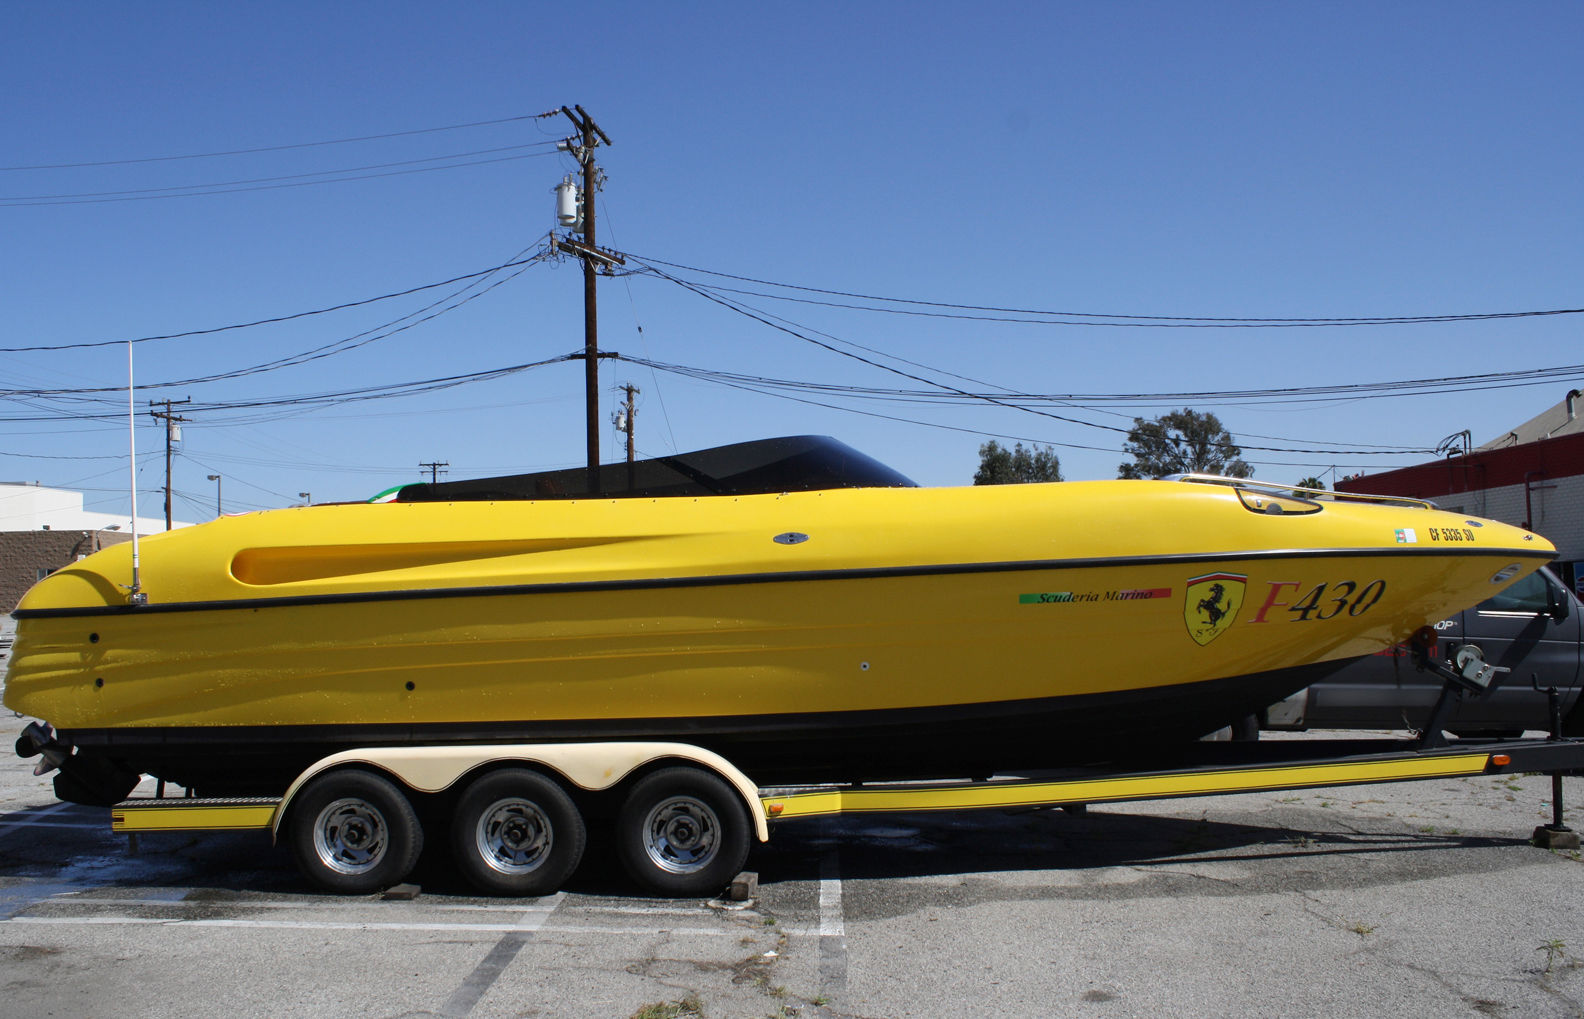 Custom Ferrari F430 Design Molded PowerBoat **No Reserve 2007 for sale for $20,000 - Boats-from ...